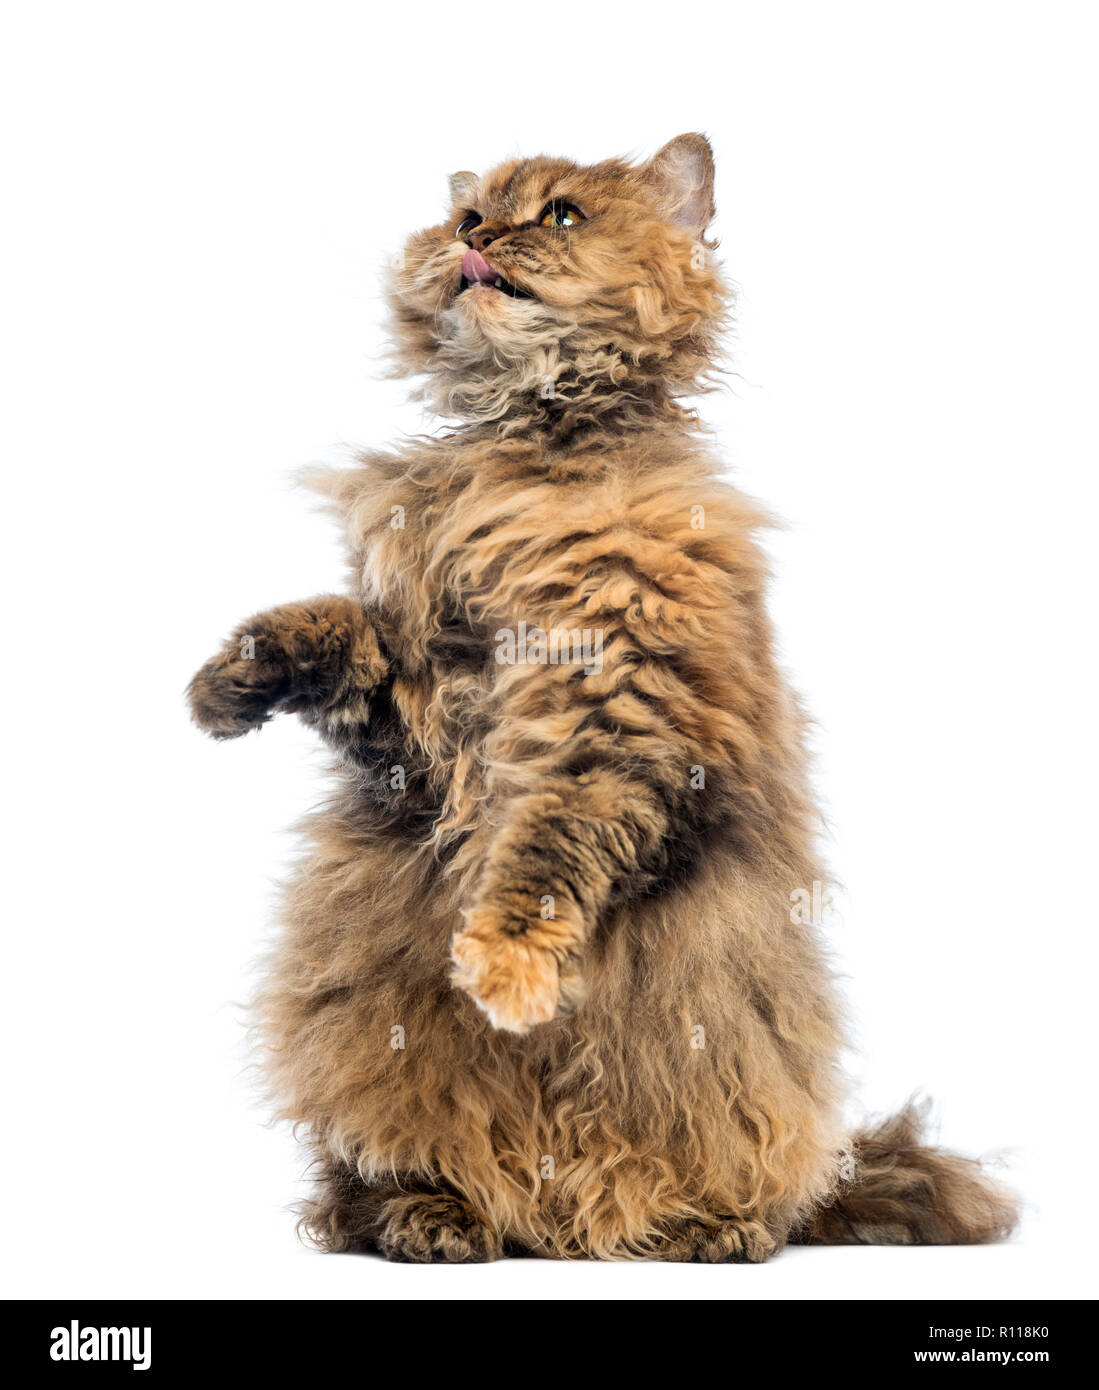 Selkirk Rex, 5 months old, standing on hind legs and reaching, licking against white background Stock Photo